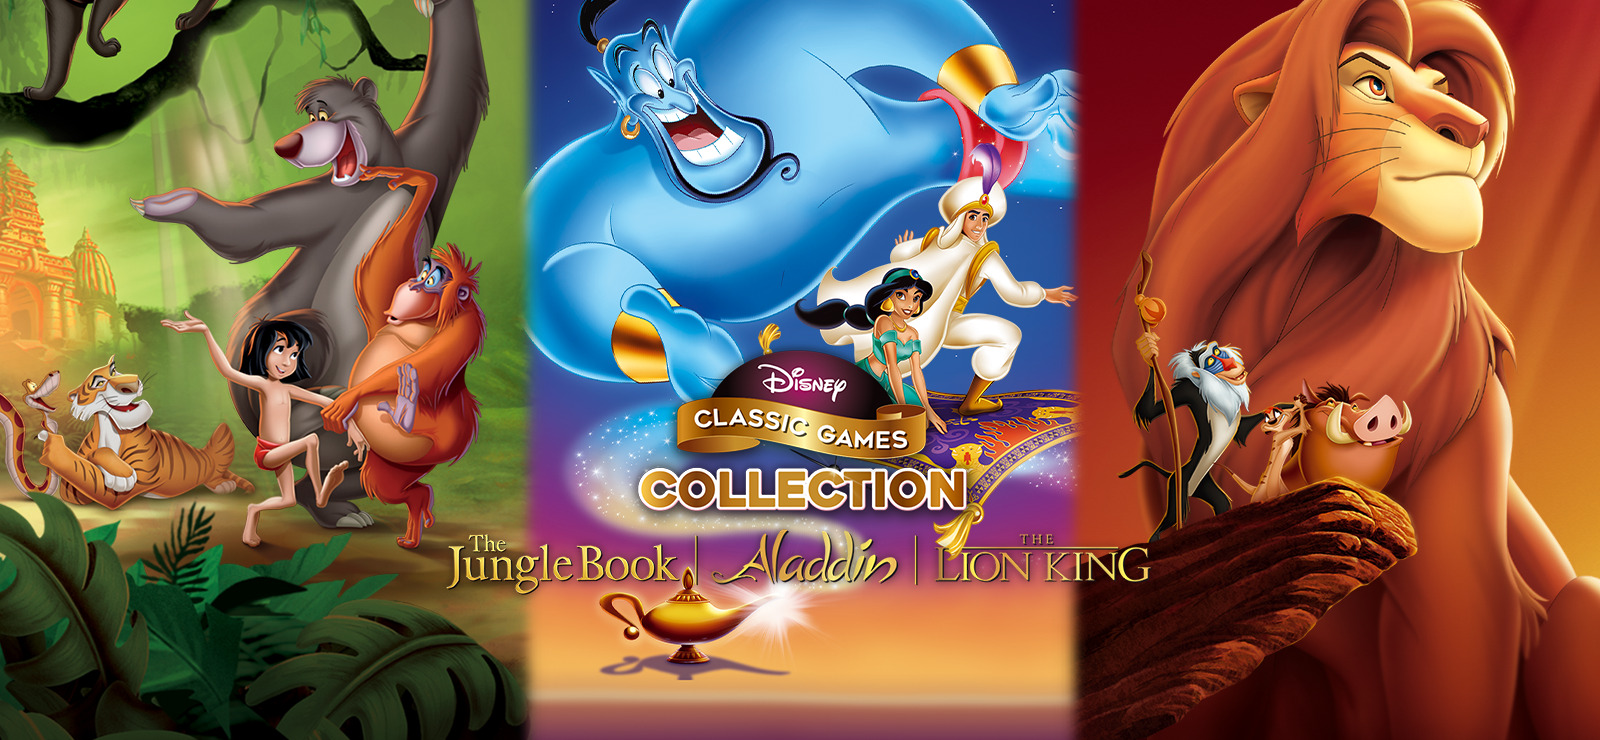 Disney Classic Collection on GOG.com